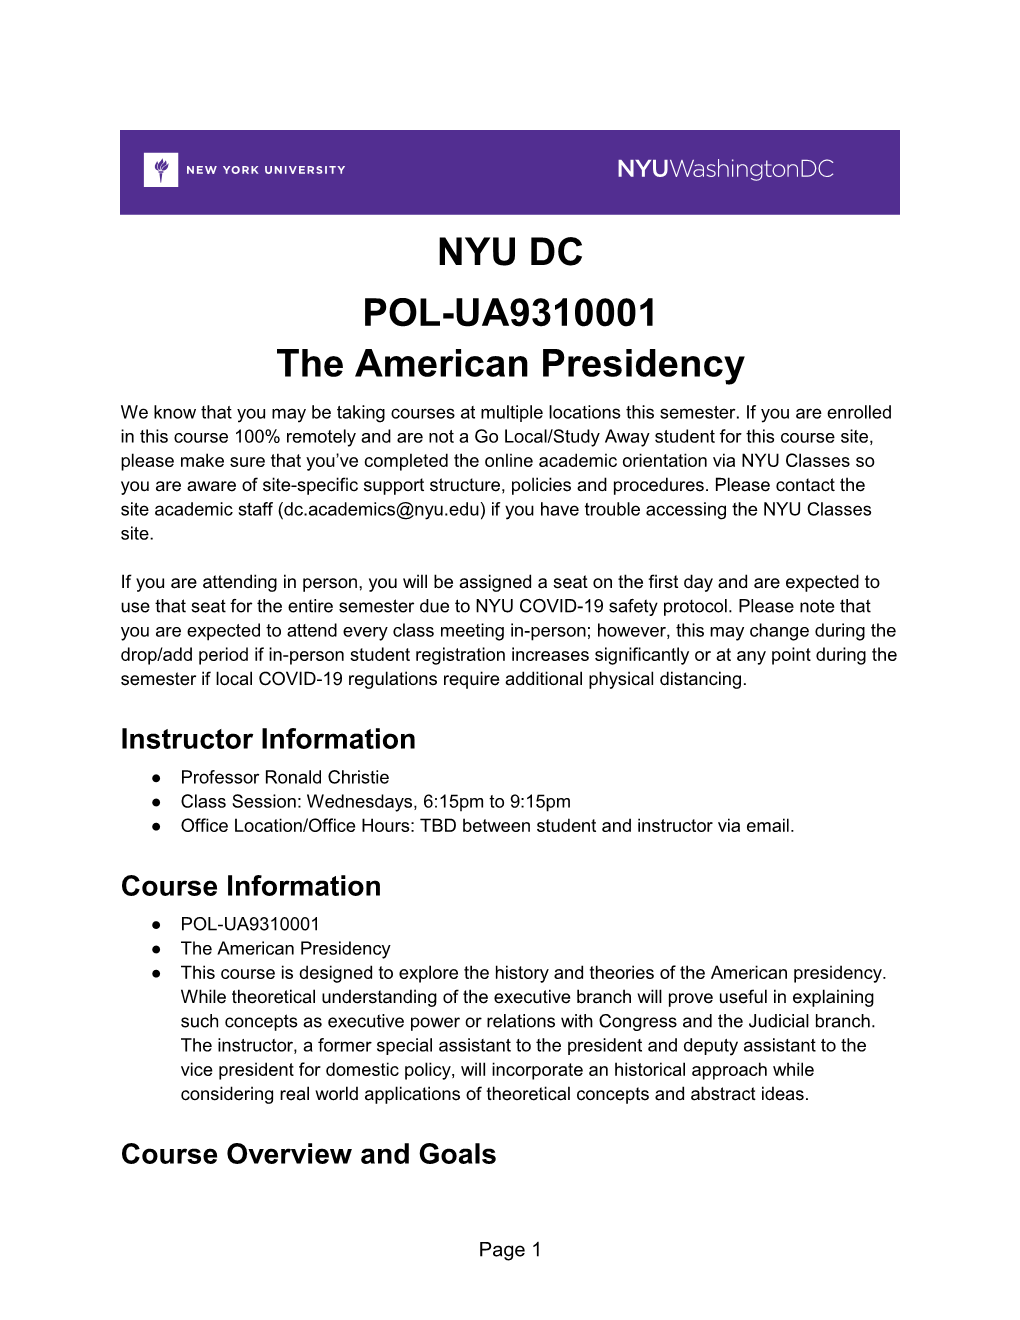 NYU DC POL-UA9310001 the American Presidency We Know That You May Be Taking Courses at Multiple Locations This Semester